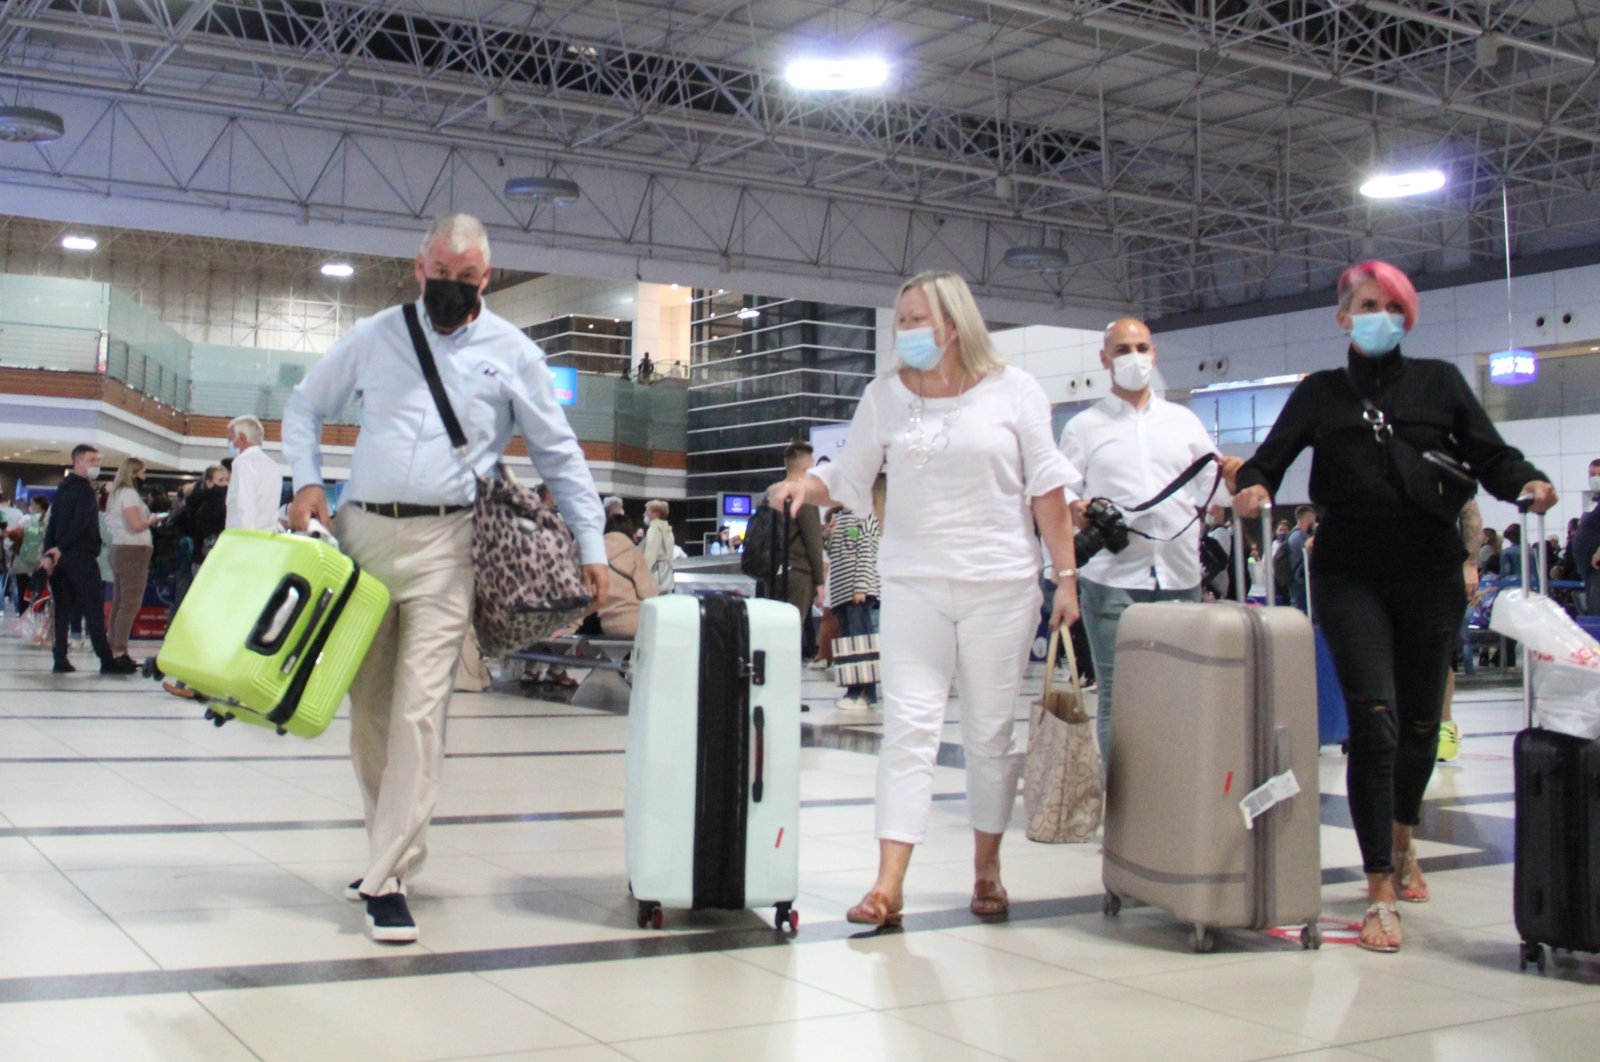 British tourists arrive at an airport in the southern resort city of Antalya, Turkey, Sept. 23, 2021. (IHA Photo)